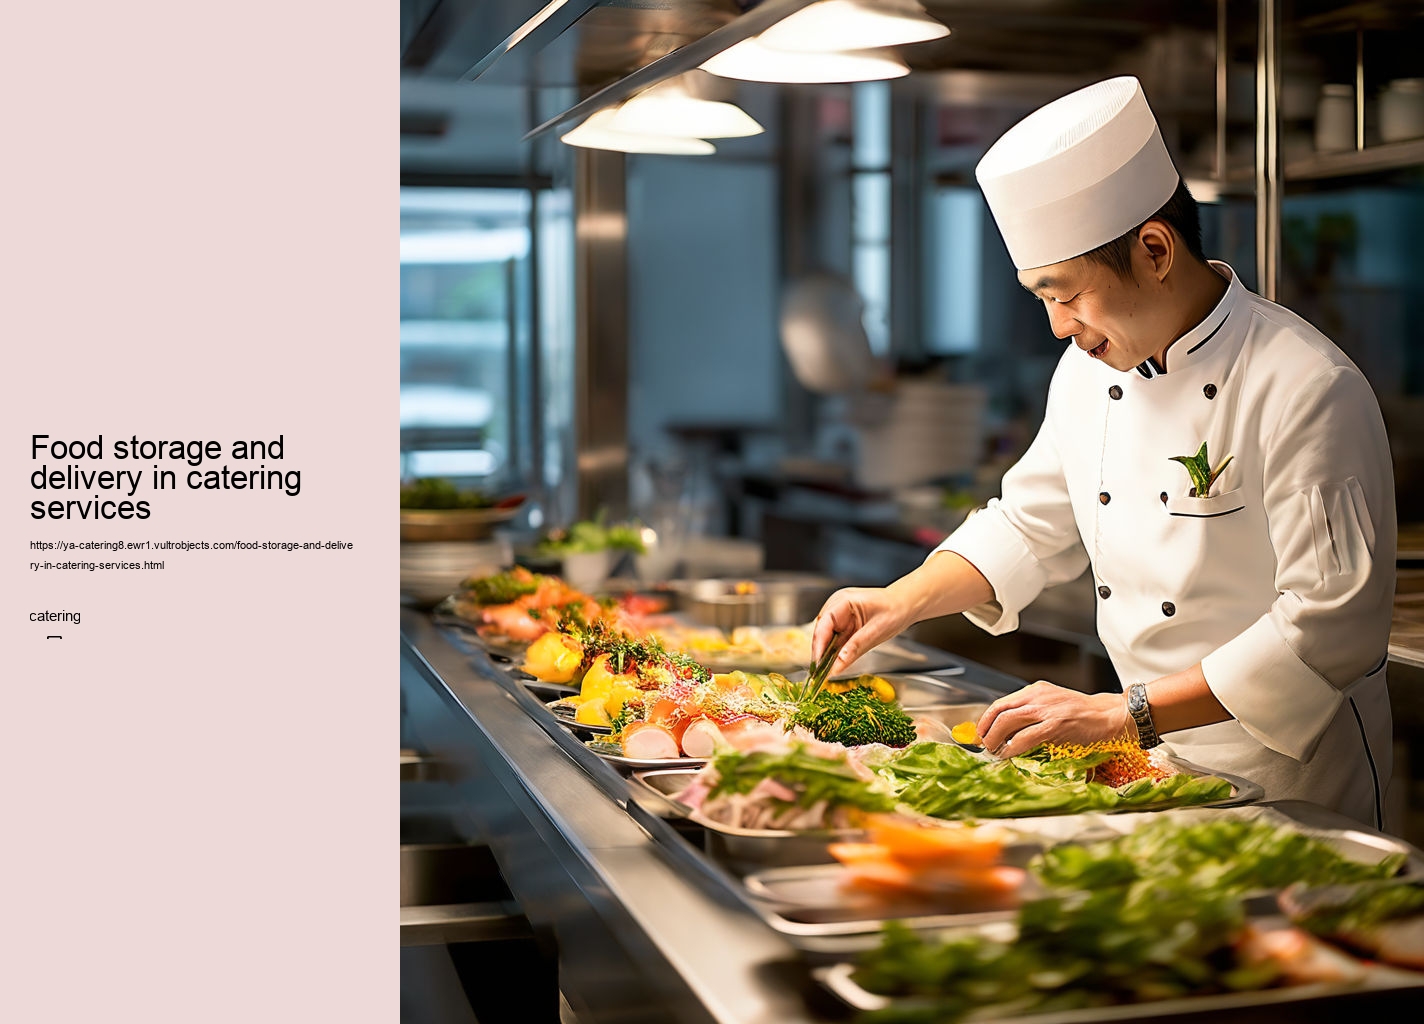 Food storage and delivery in catering services